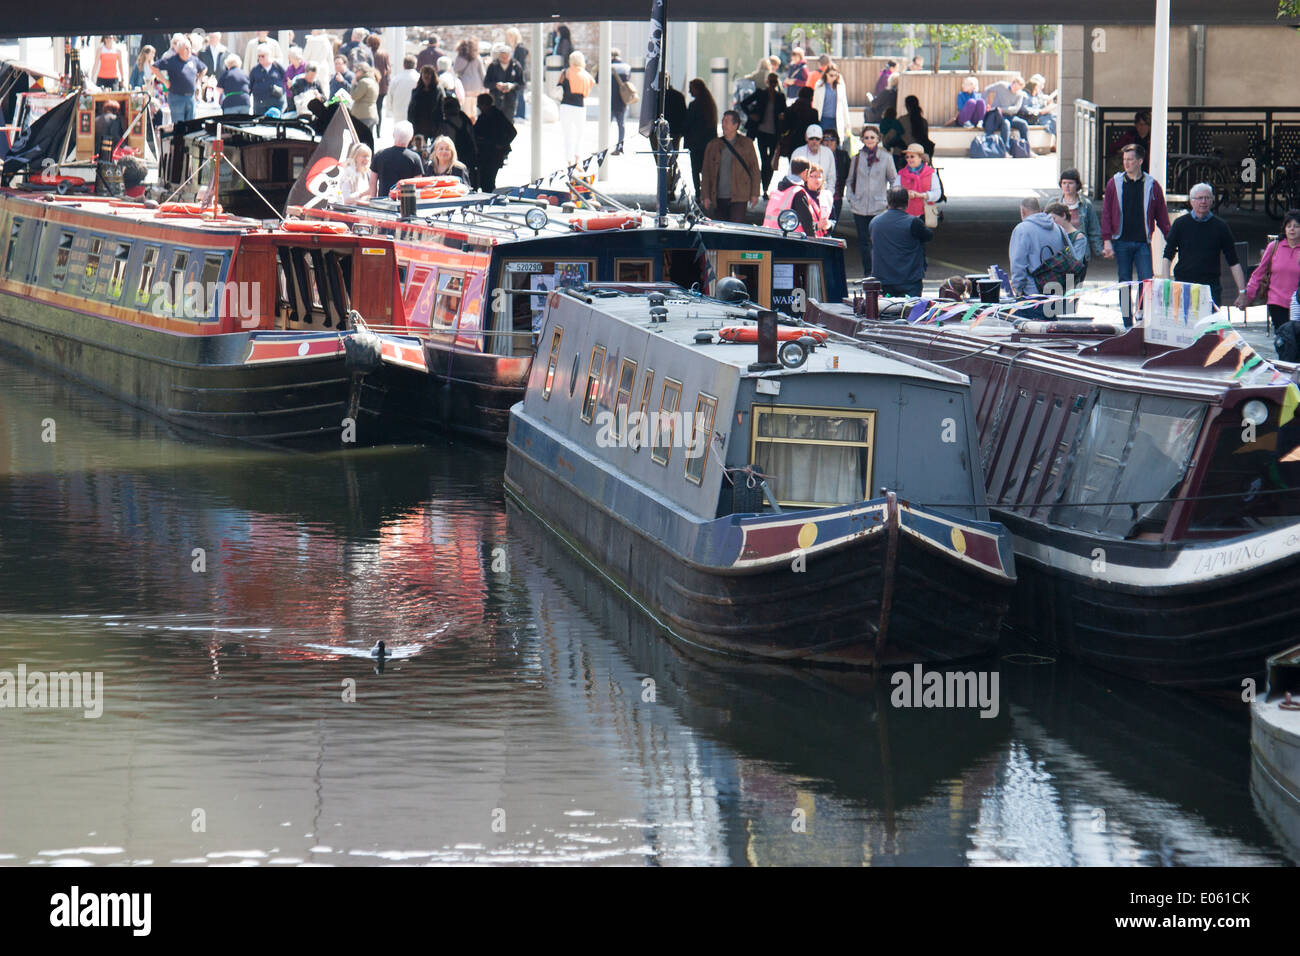 Little Venice canal London Canalway Cavalcade Stock Photo